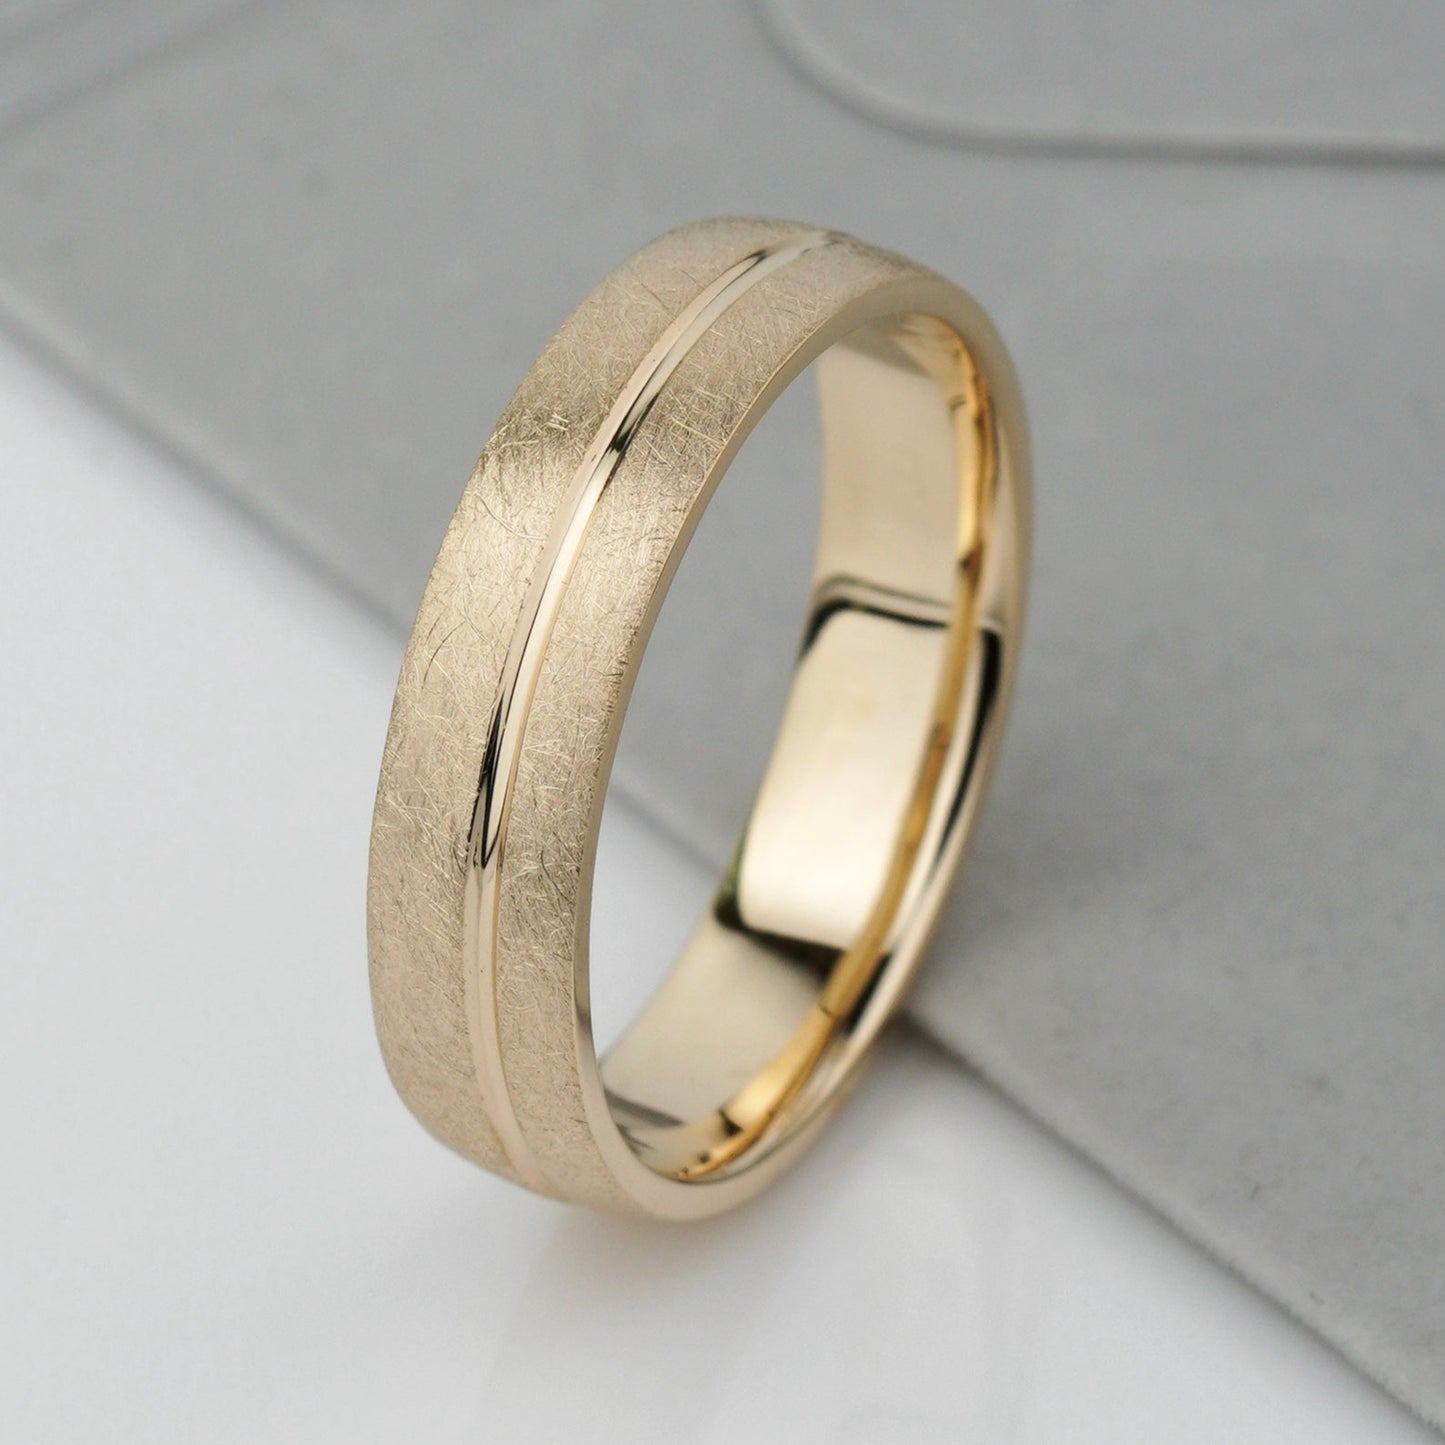 Men's wedding band with matte bruched finish, matte wedding band, men's wedding band, gold wedding band, wedding ring for him, unique wedding band